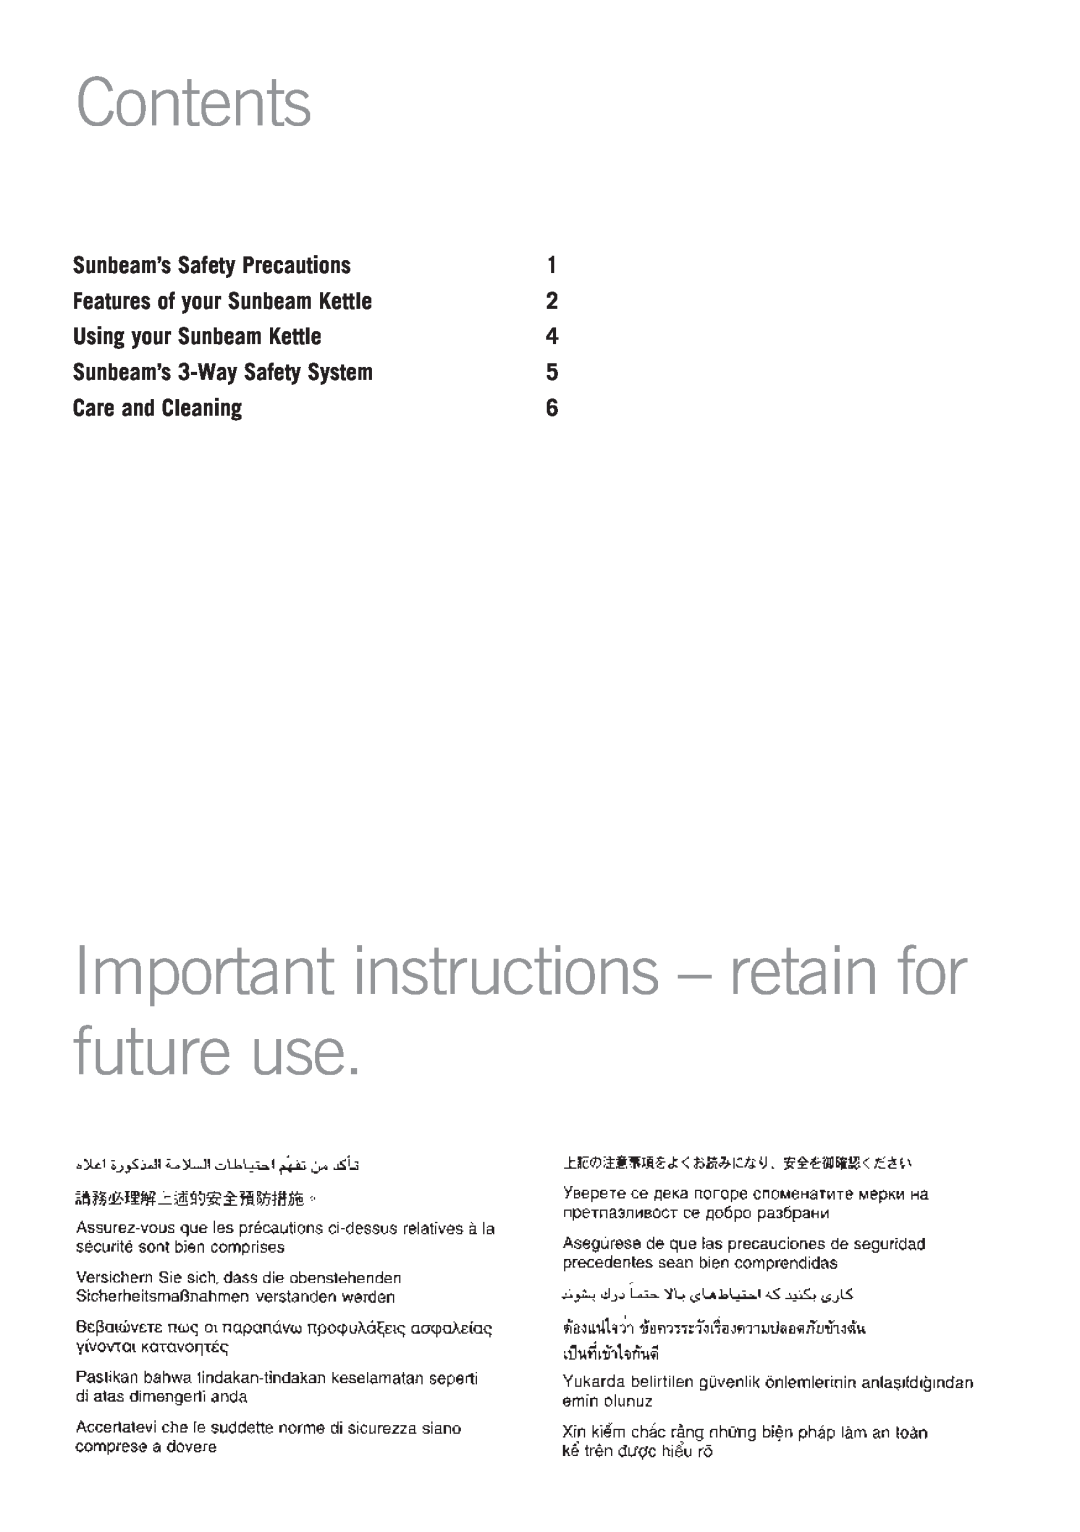 Sunbeam KE9400 Contents, Important instructions - retain for future use, Sunbeam’s Safety Precautions, Care and Cleaning 